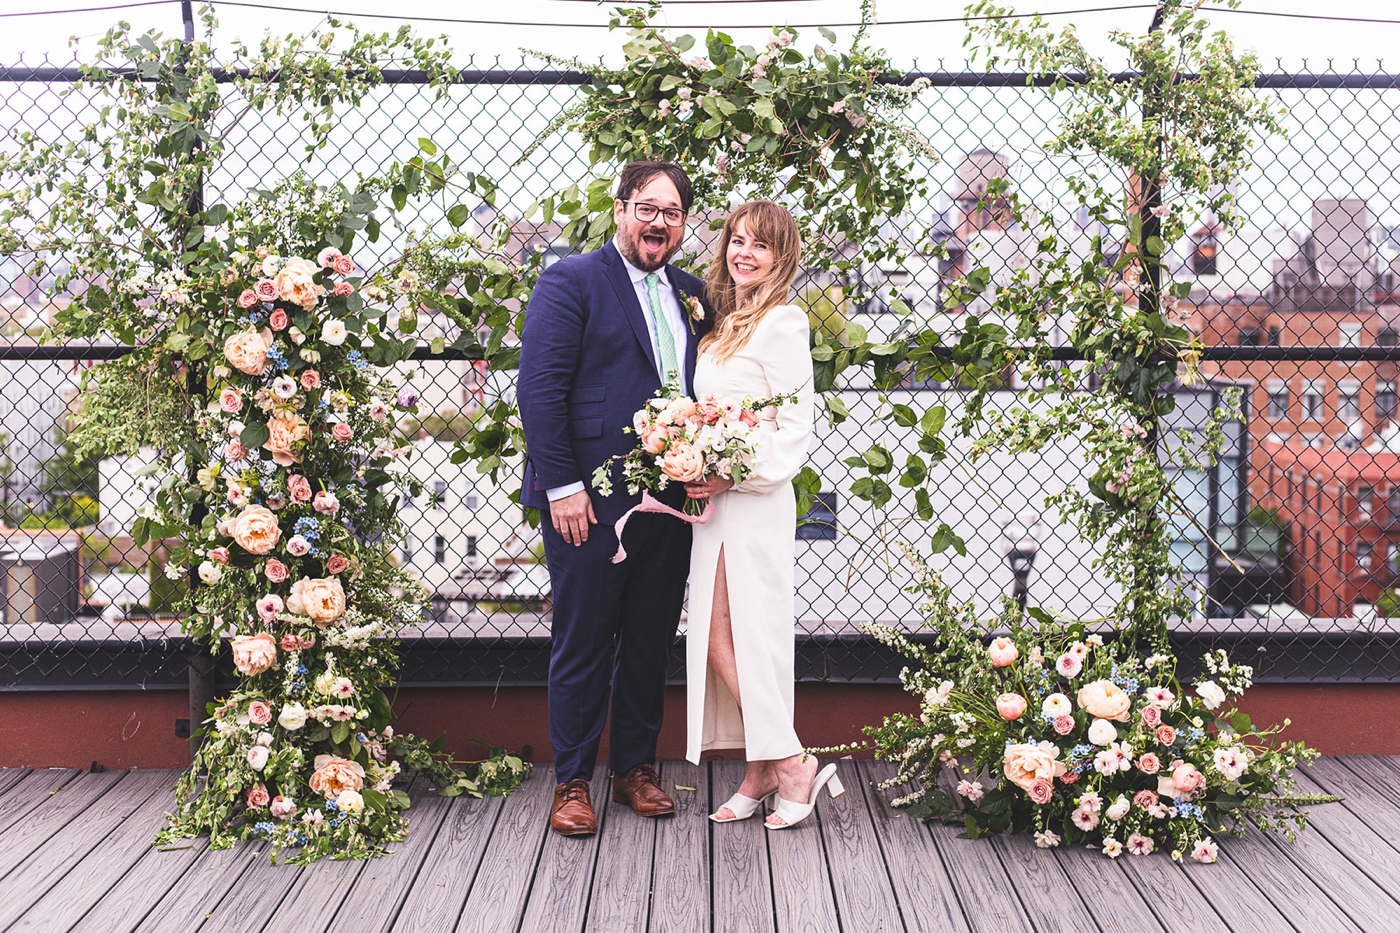 An intimate rooftop elopement - virtual wedding by Verve Event Co.